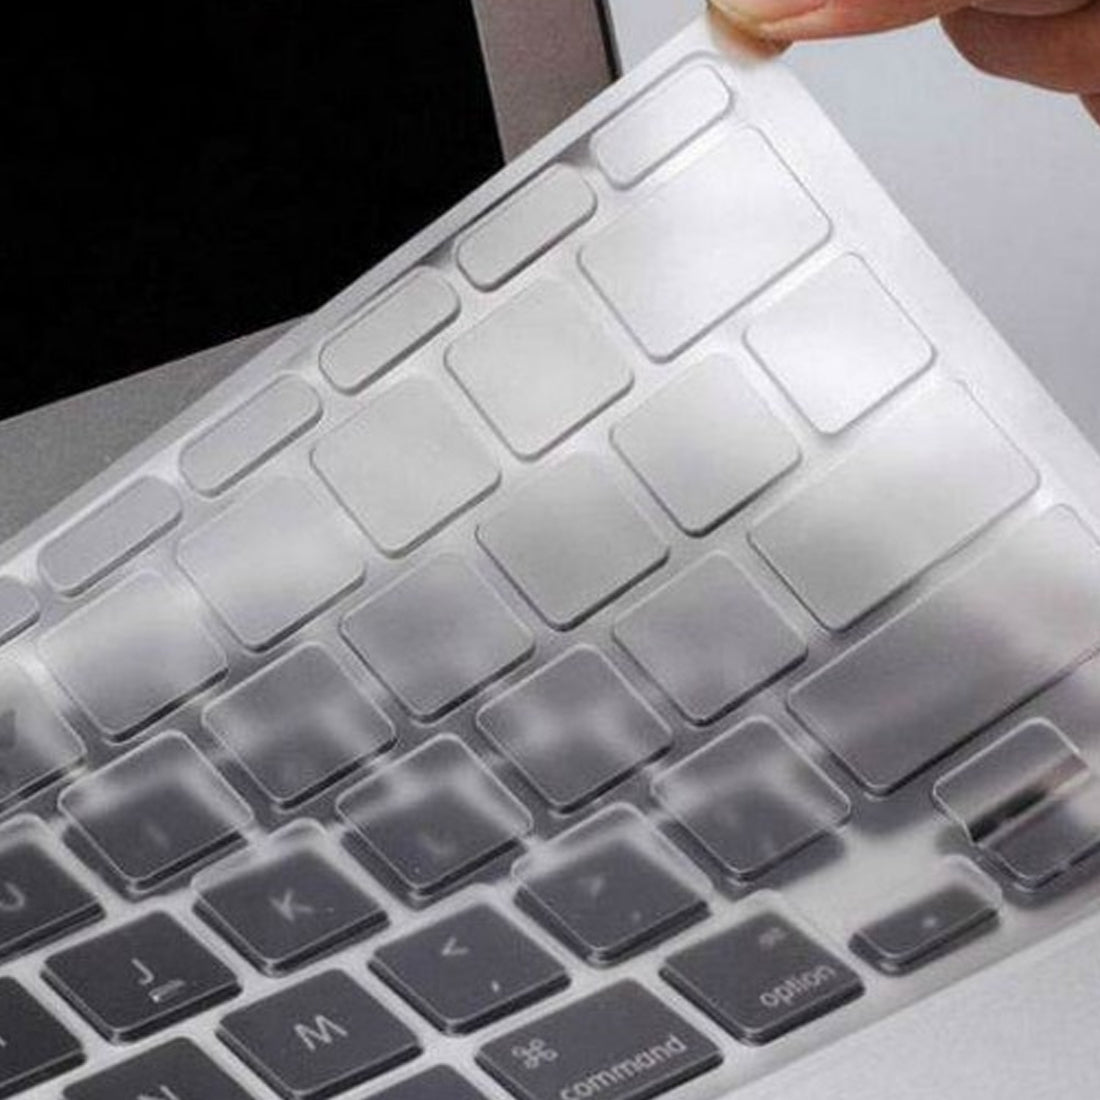 Silicon Keyboard Cover Laptop Skin Notebook Protector for Apple For Macbook Air 13/Retina 13 15/Pro 13 15